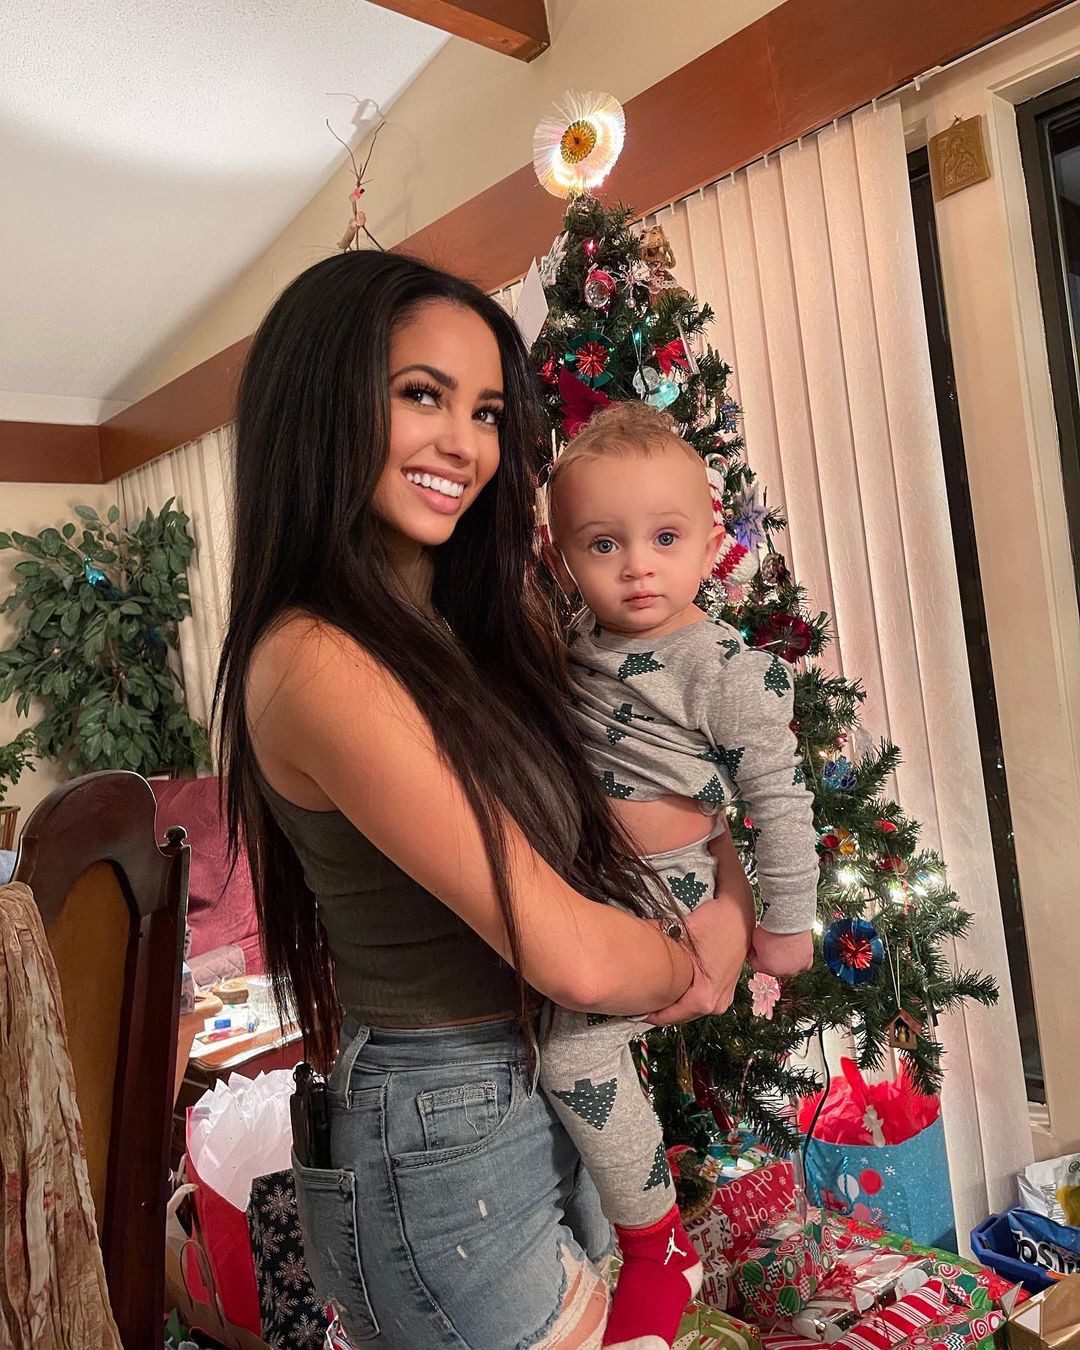 Michael Kopech, who dumped his then pregnant Riversdale actress wife  Vanessa Morgan, now has a pregnant new girlfriend playing stepdaddy to her  kid